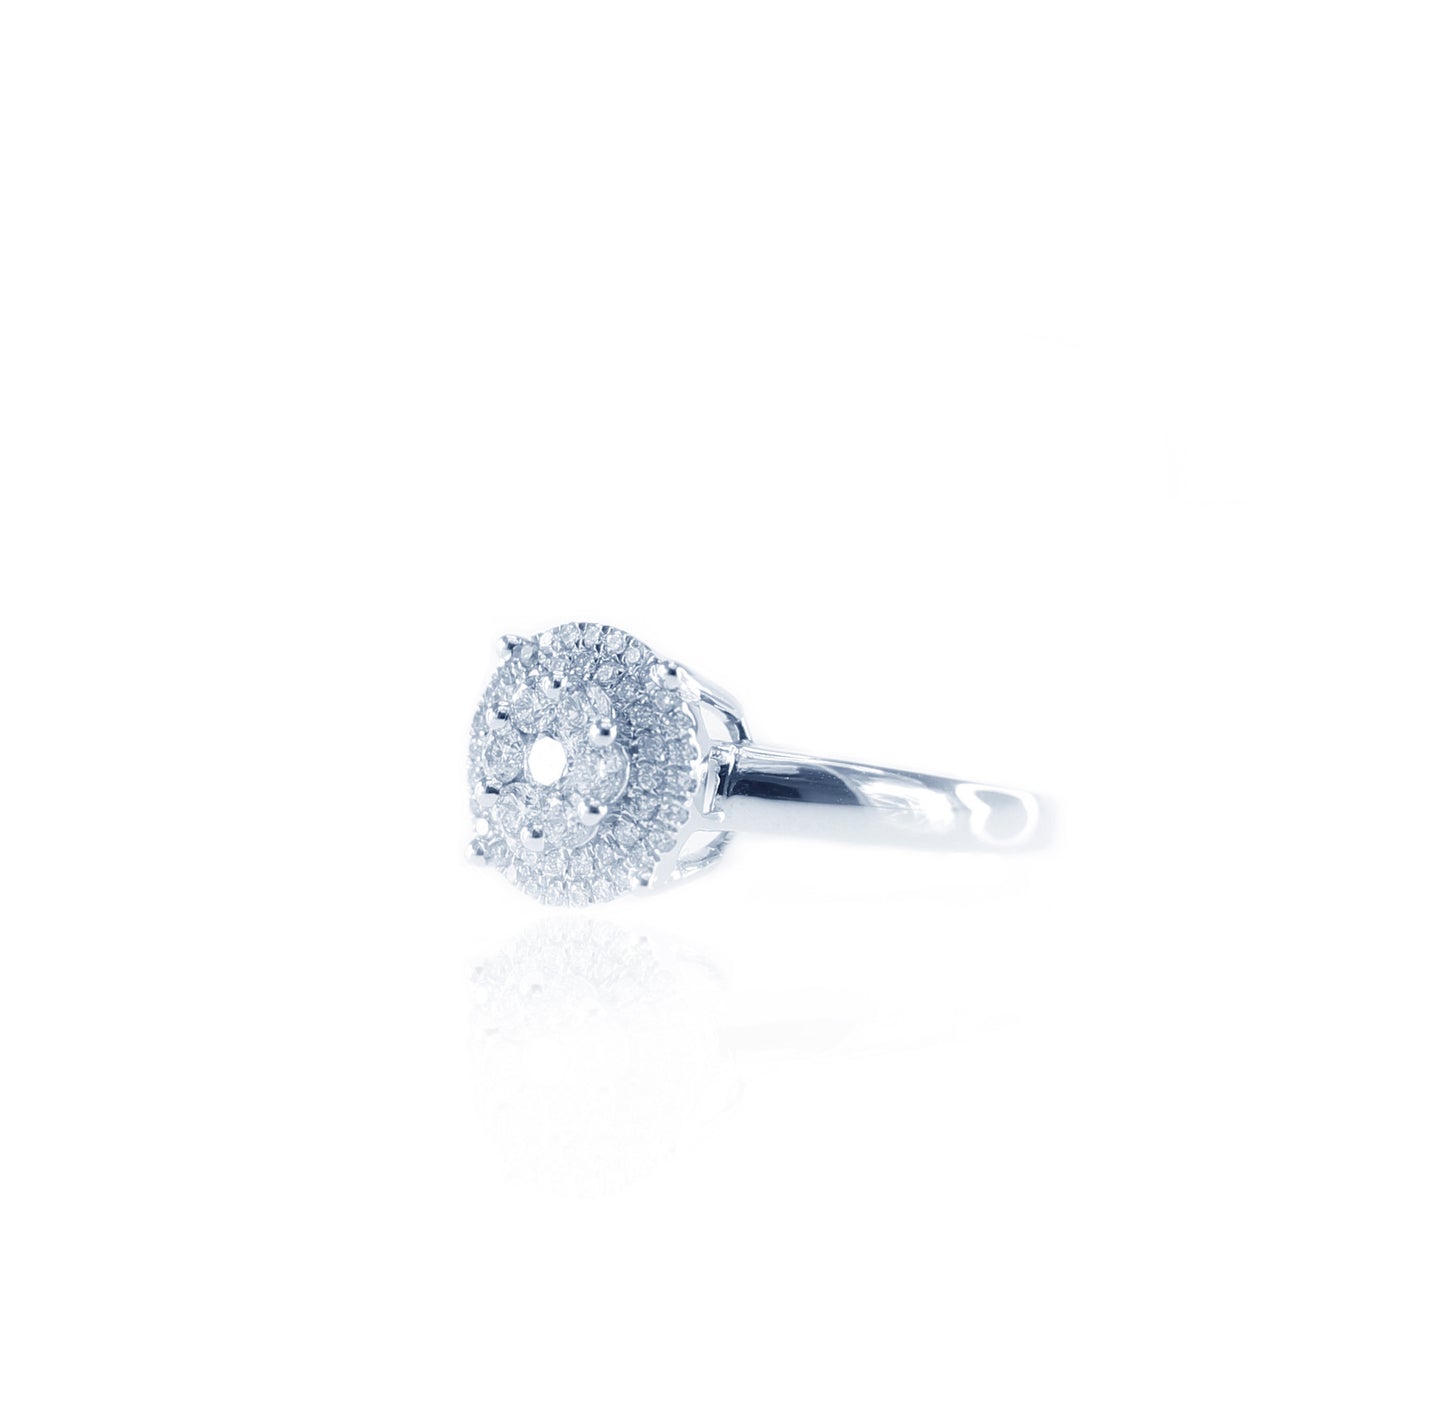 Diamond Carnation Double Halo Ring in 18K White Gold